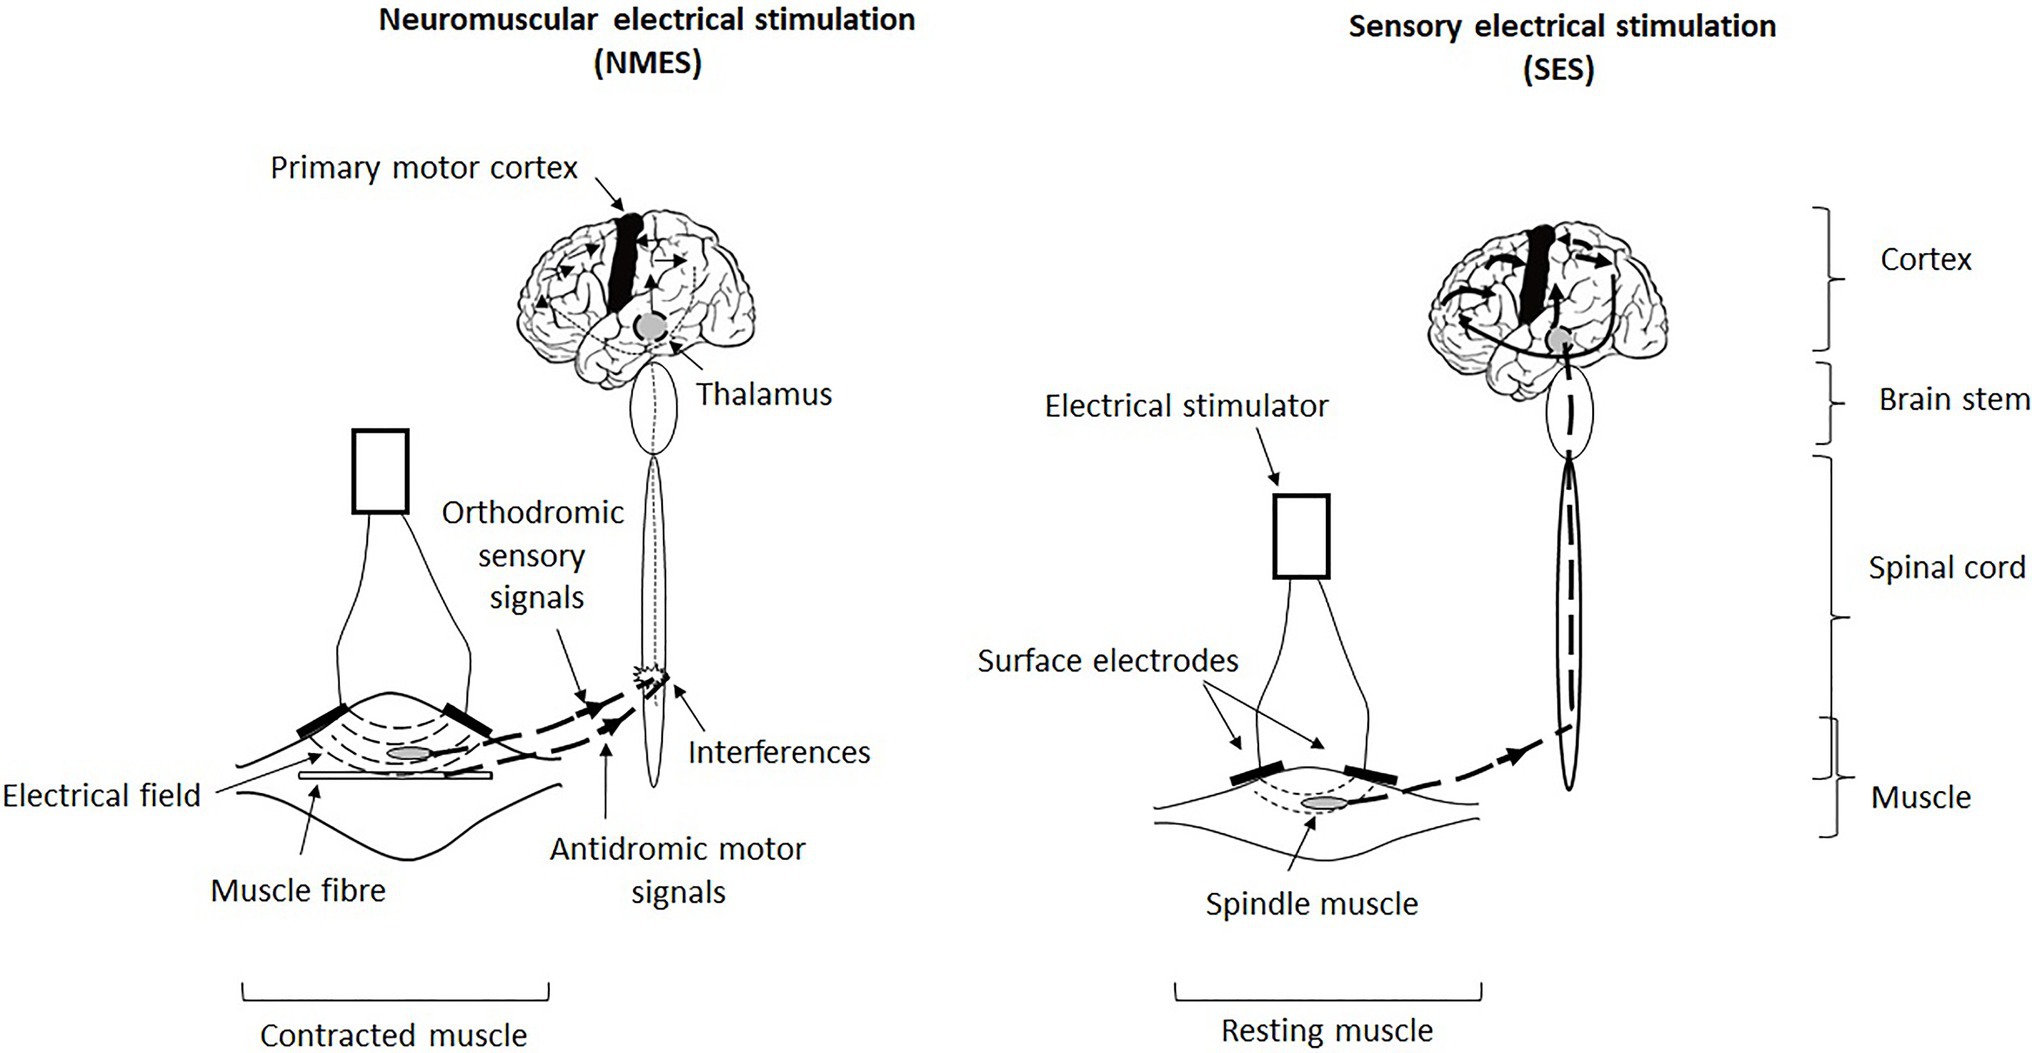 A Comparison of Multipath and Conventional Neuromuscular Electrical  Stimulation